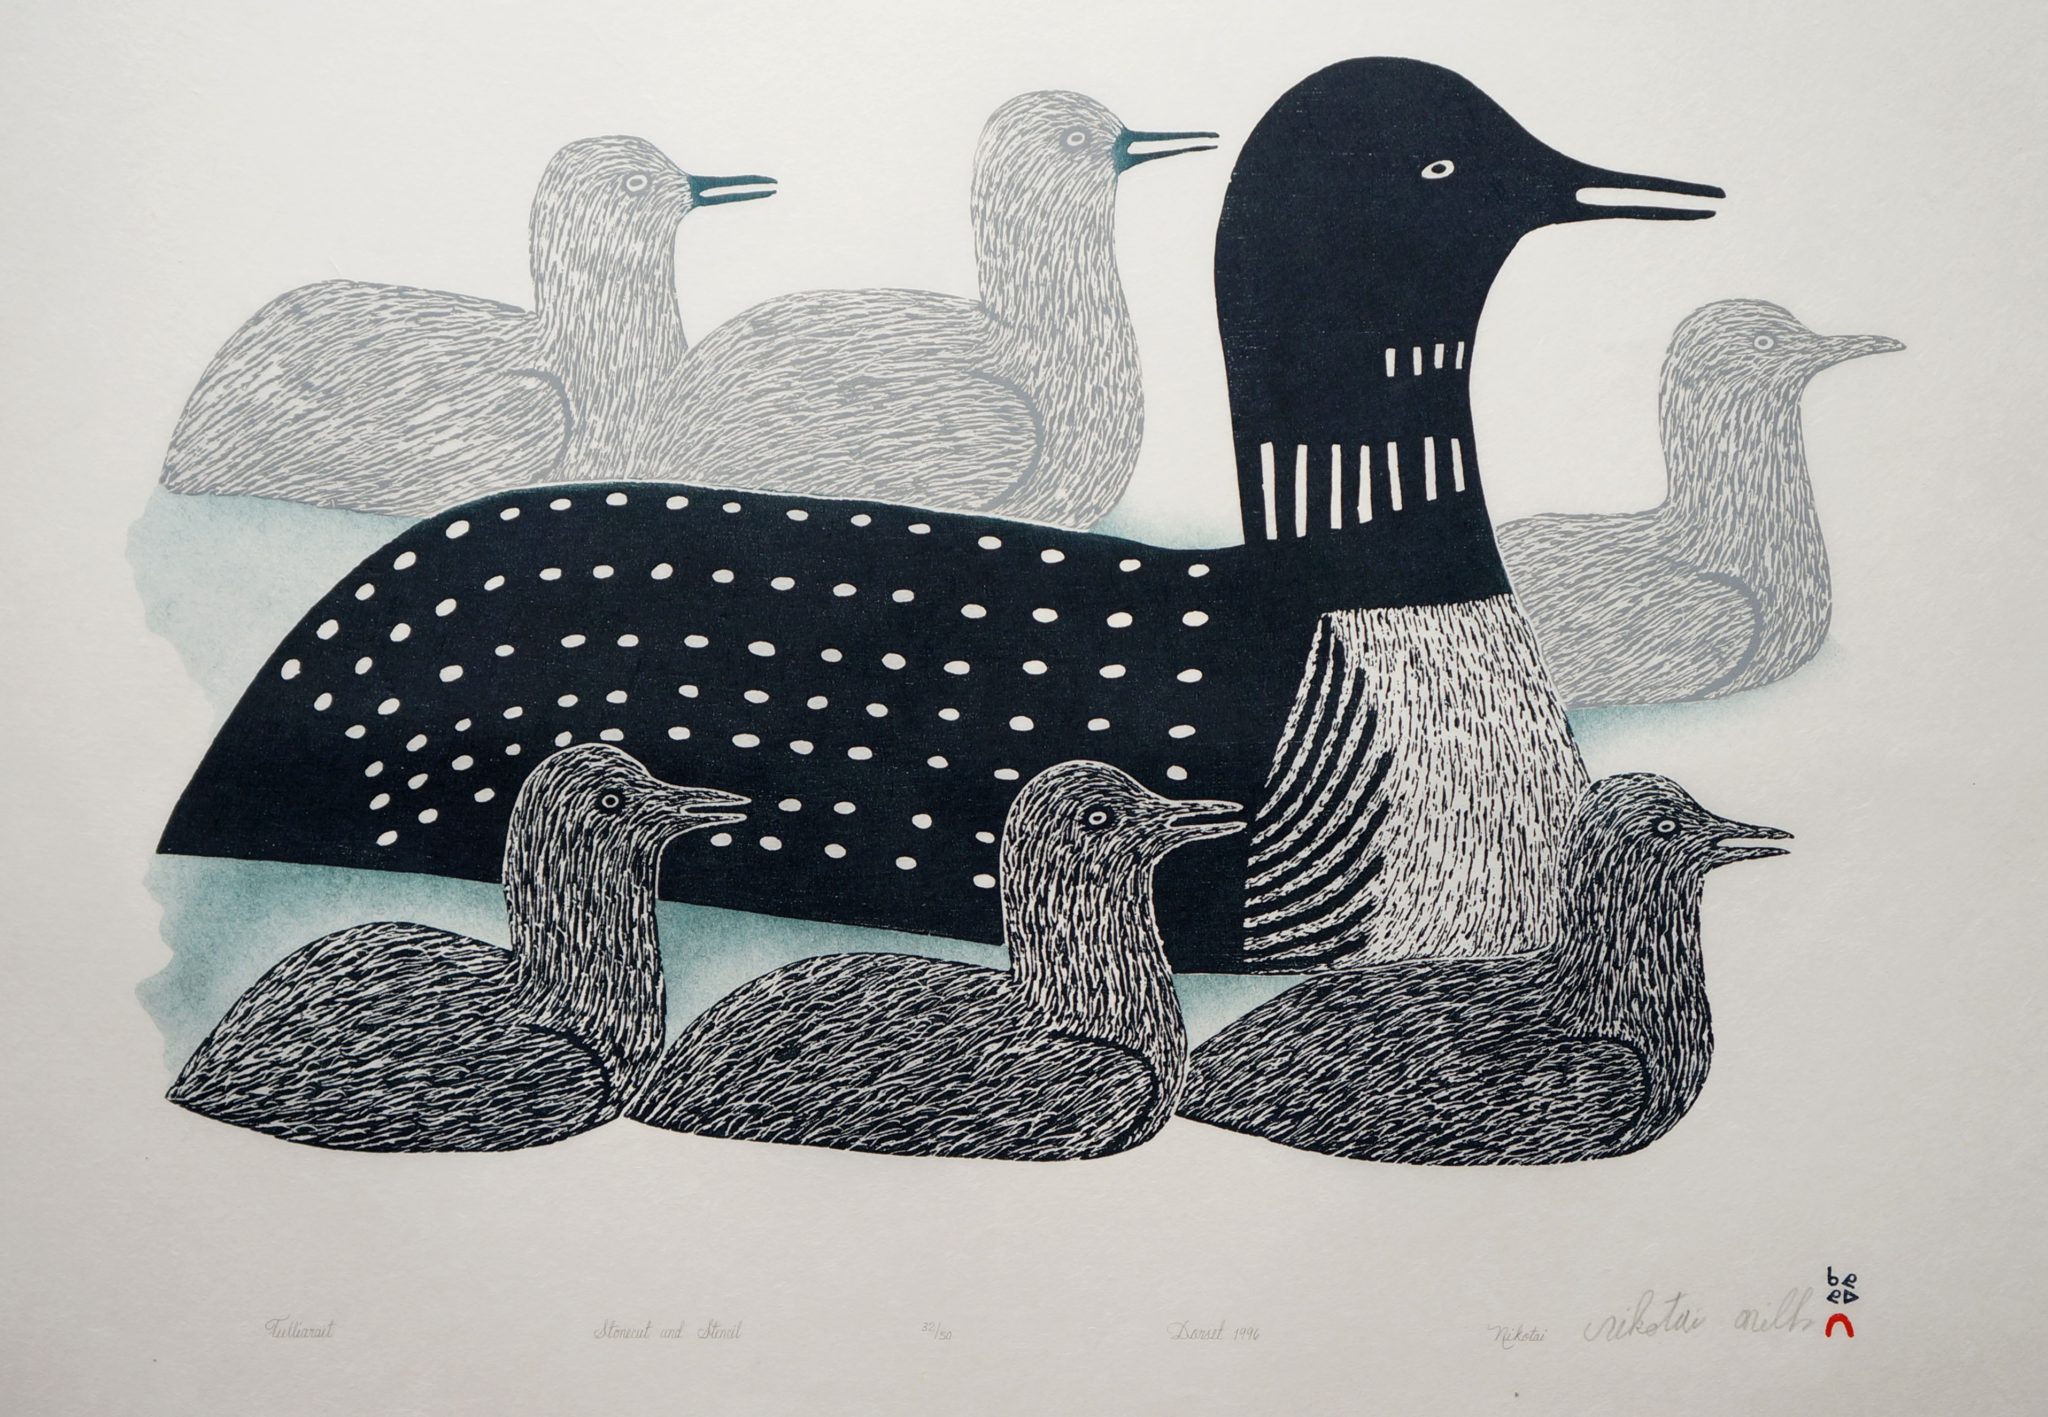 Nikotai Mills Inuit Cape Dorset Stonecut & Stencil c. 1996 #32/50 31"W x 24.5"H nikotai miller inuit cape dorset canada canadian stonecut stencil print nunavut loons baby loons chicks chick loon collection